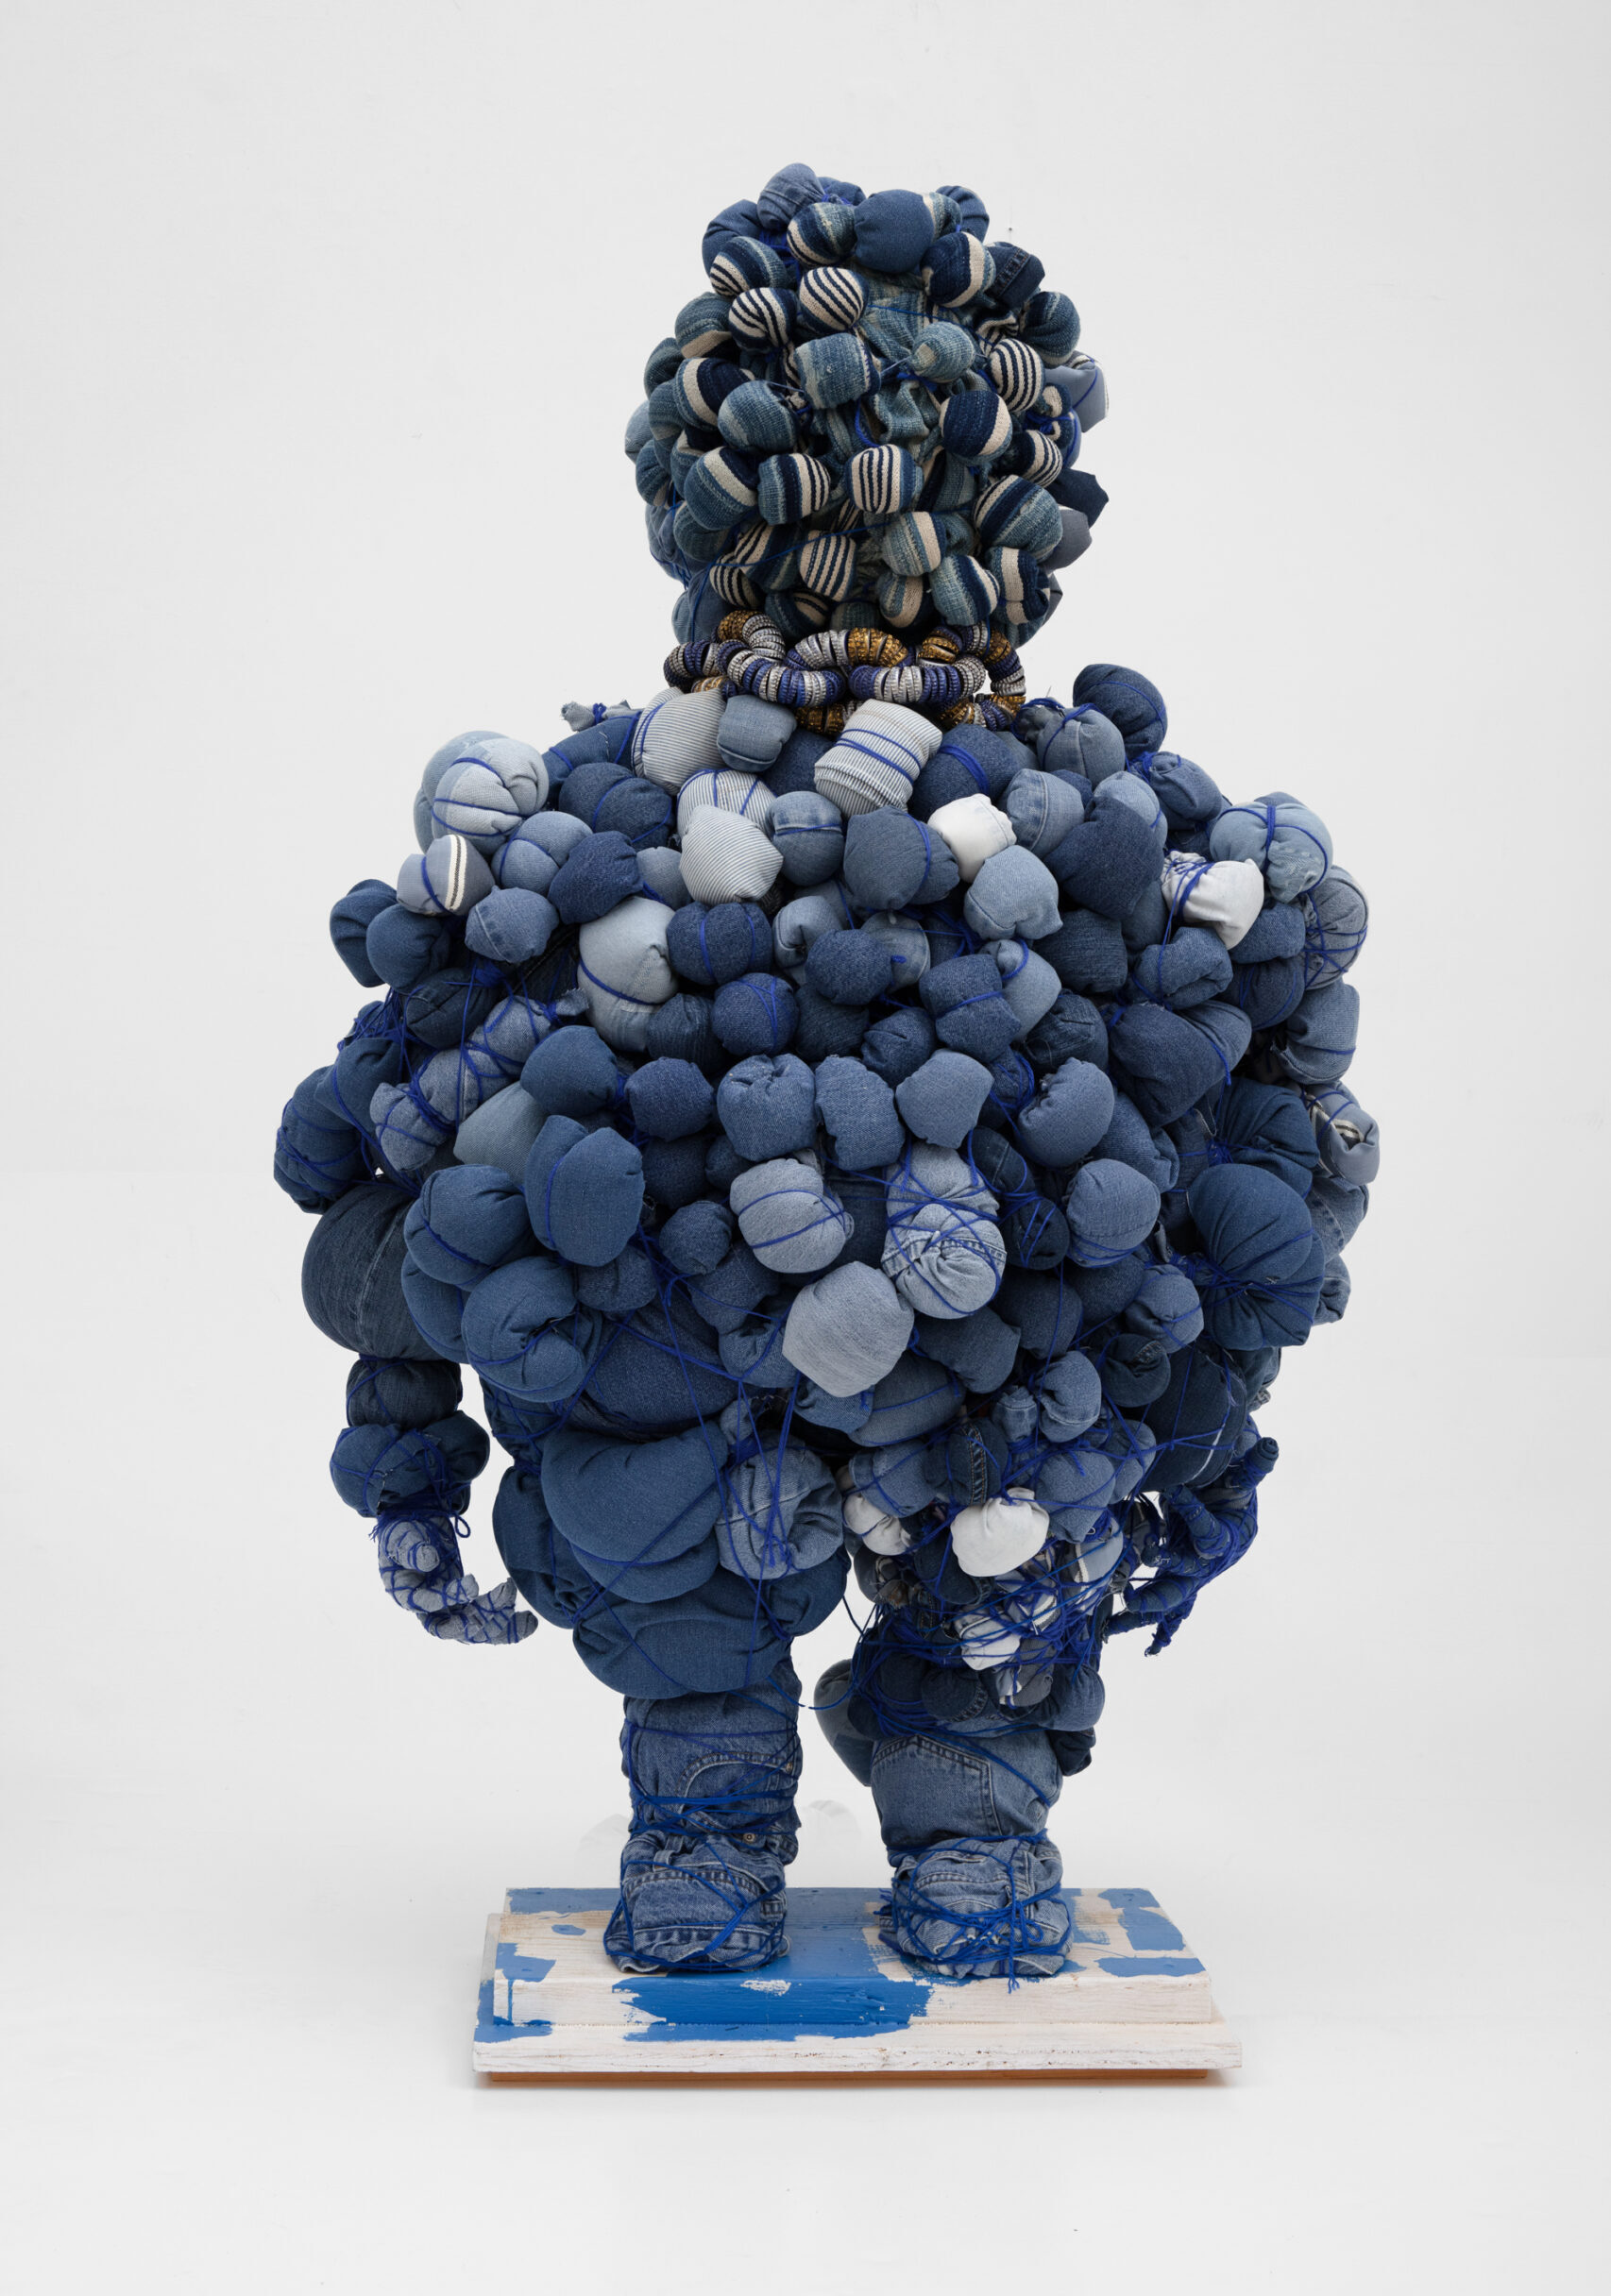 A mixed-media sculpture made of different pairs of blue jeans all balled up with yarn and twine.